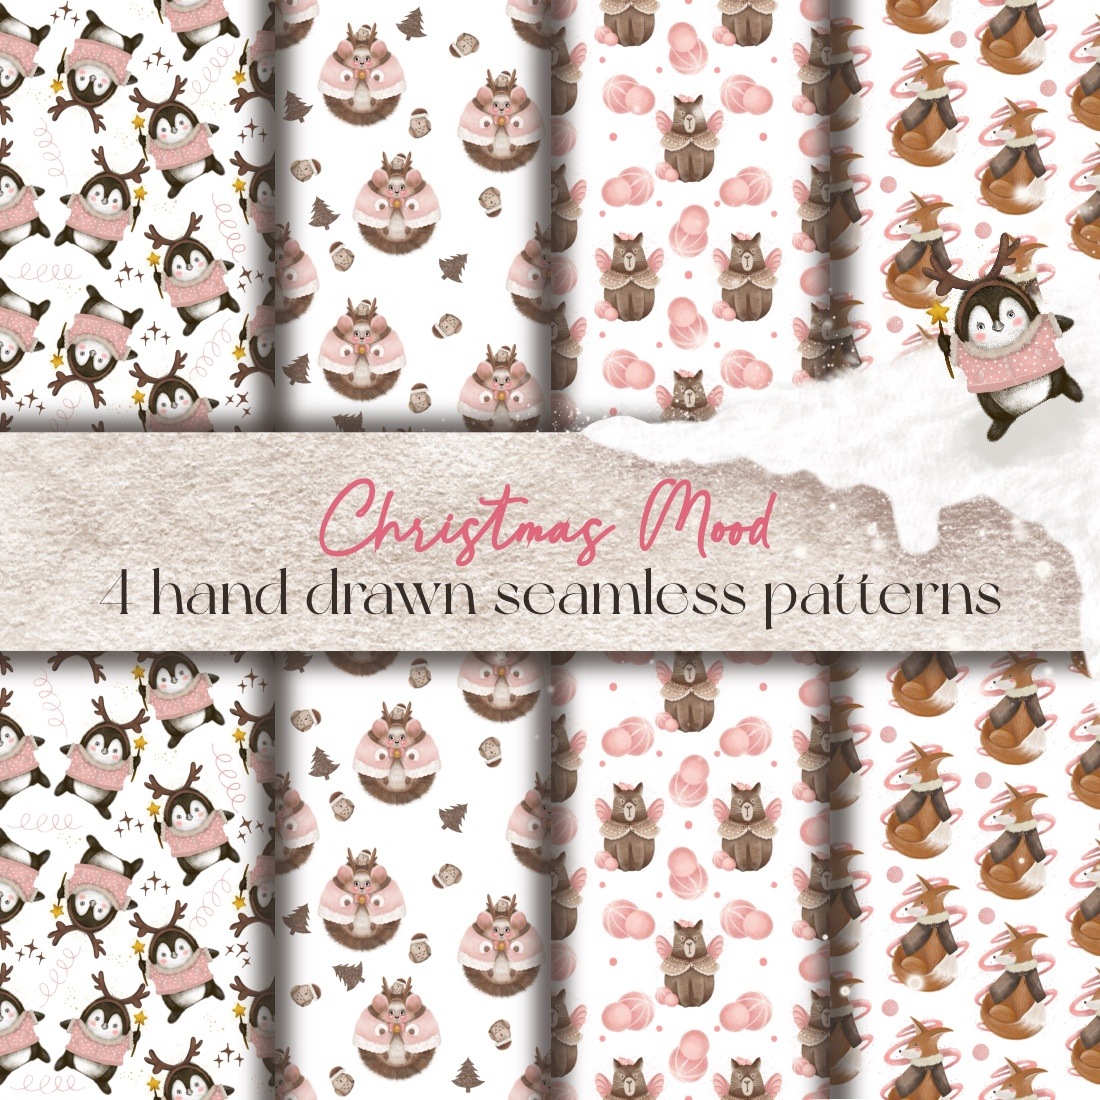 Christmas mood drawn seamless patterns + gift 4 stickers cover image.